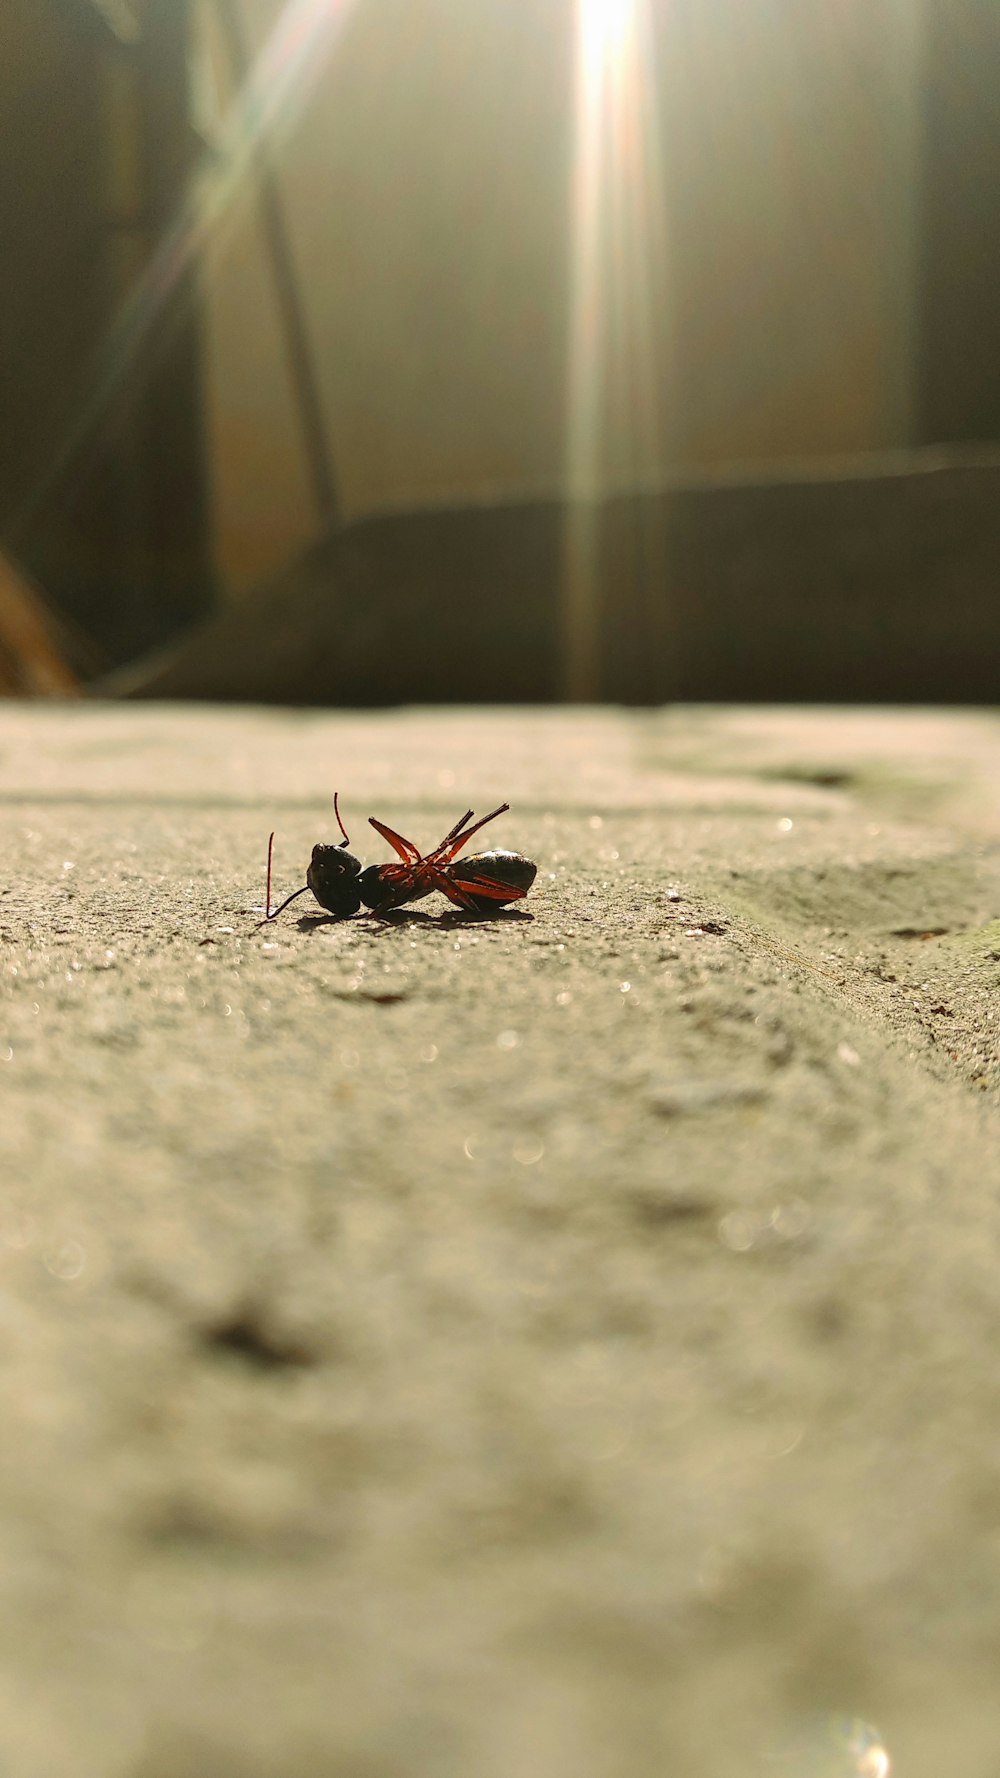 black and red insect on gray concrete floor